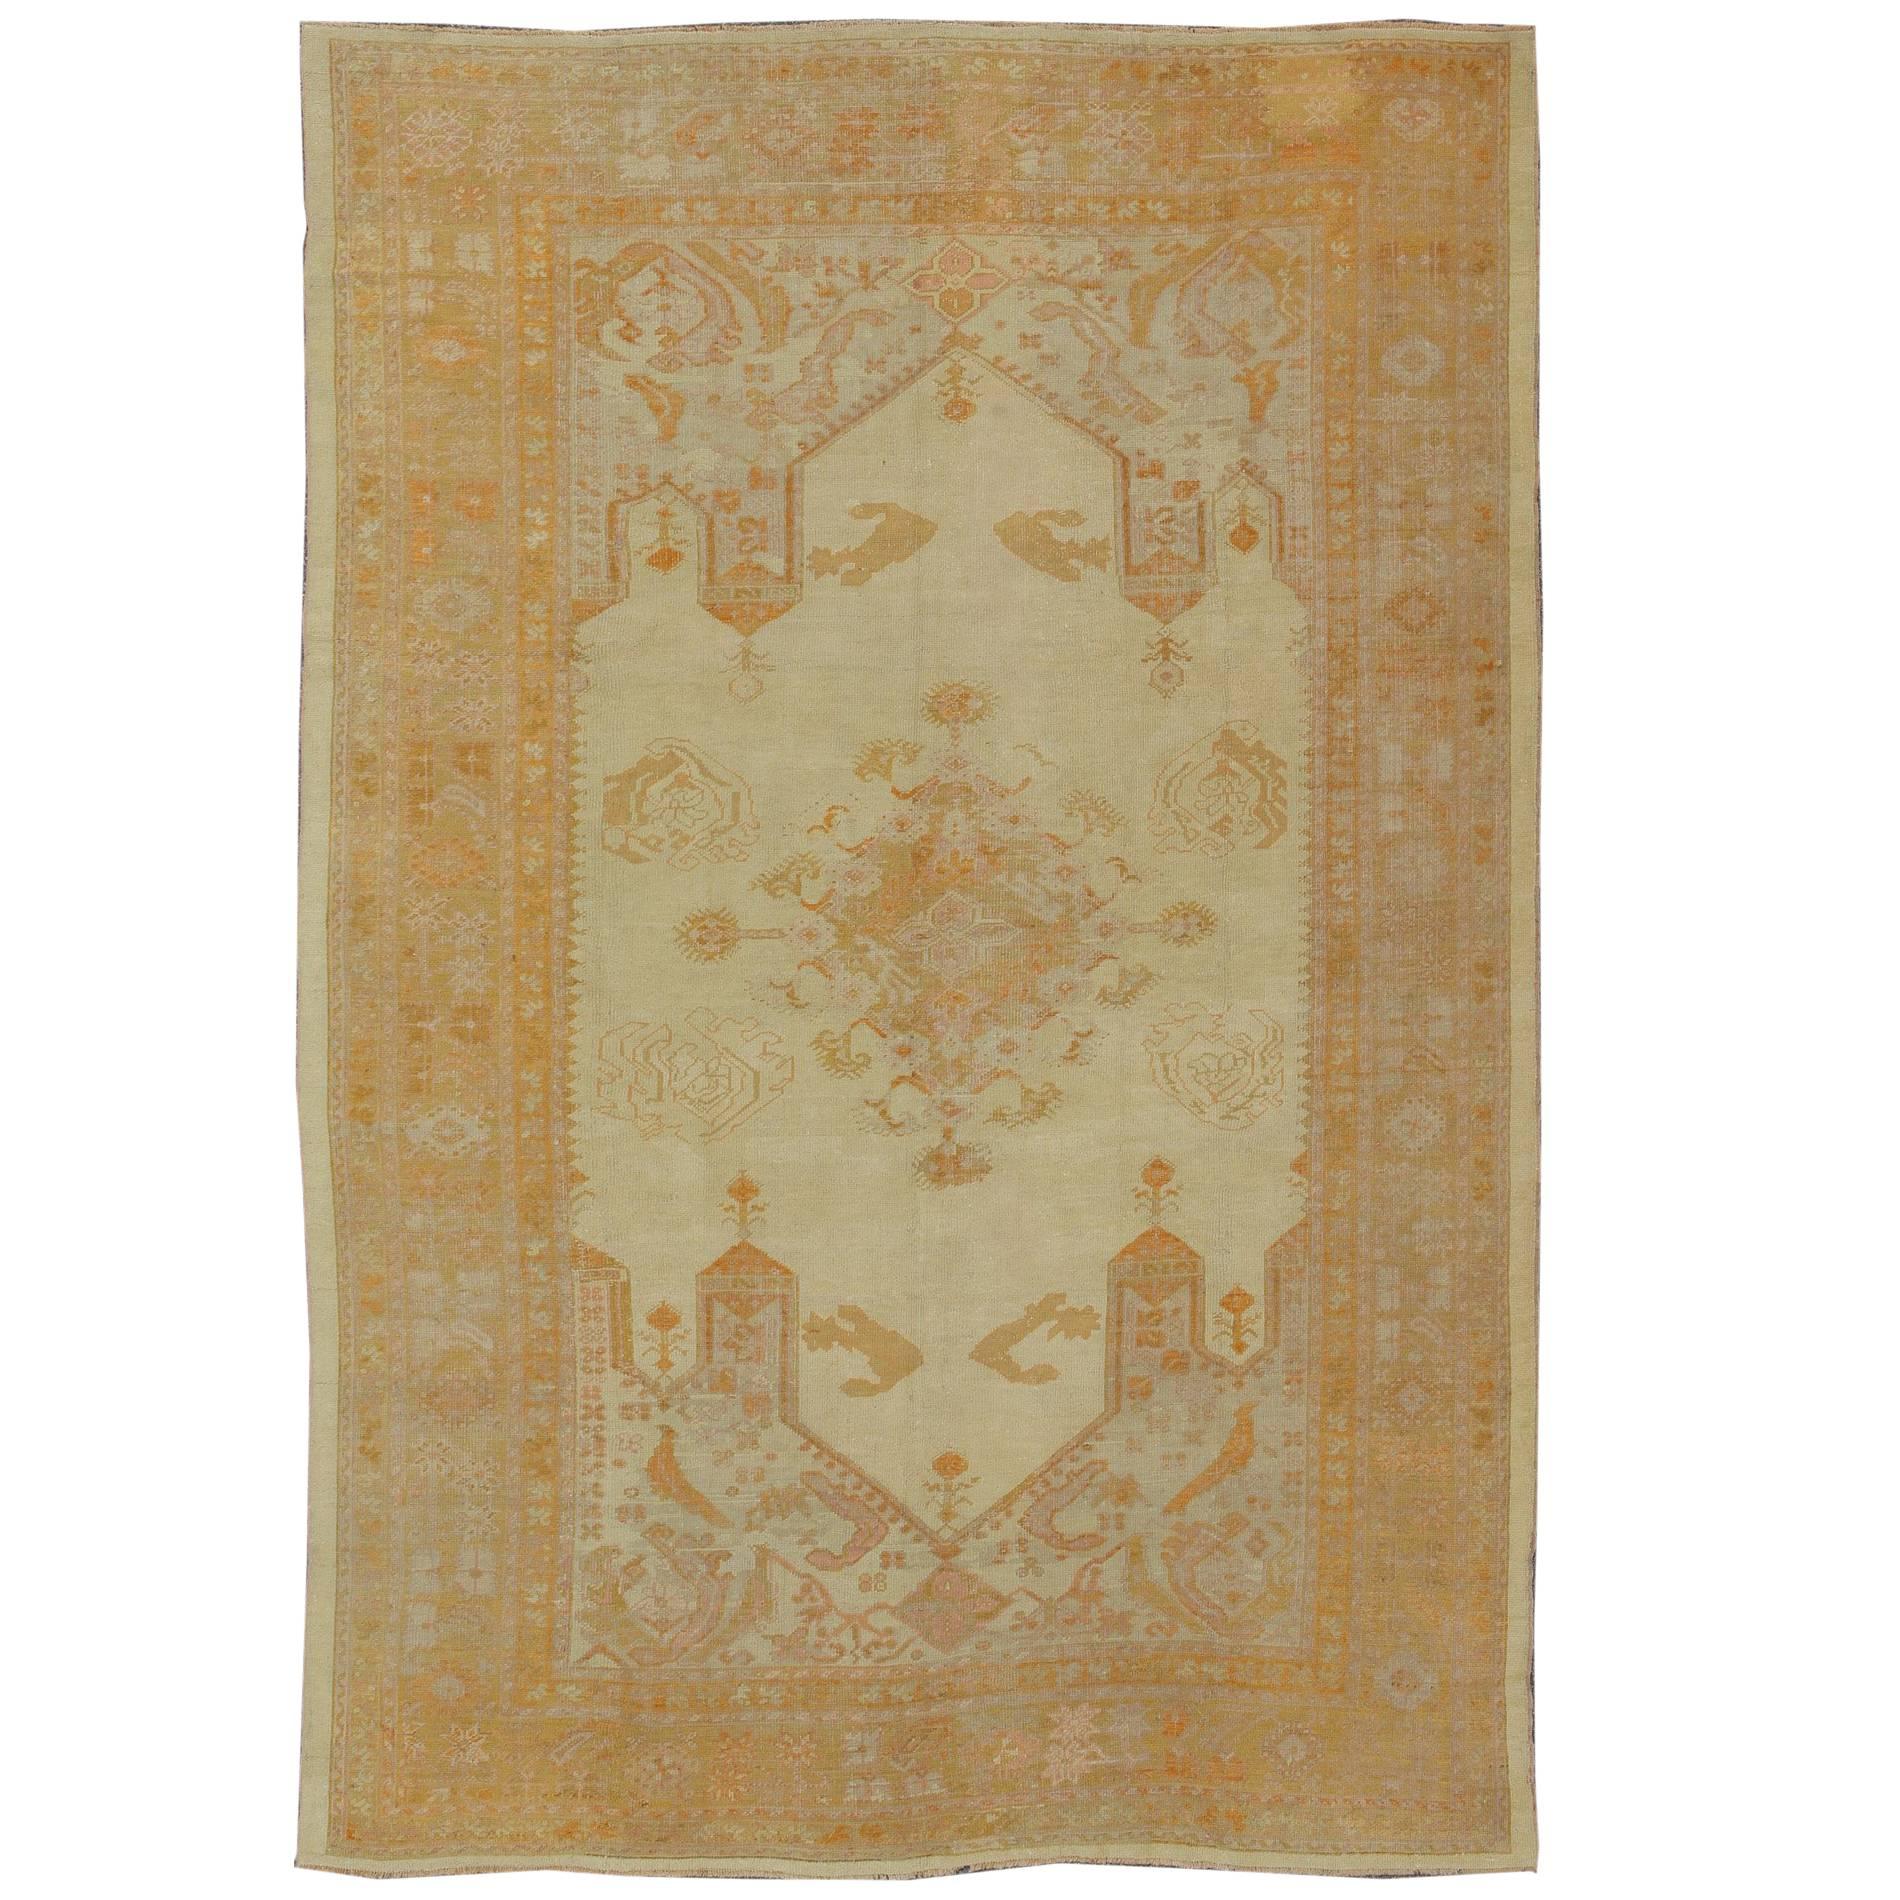 Antique Turkish Oushak Rug with Geometric in Cream, Lavender, Green and Orange